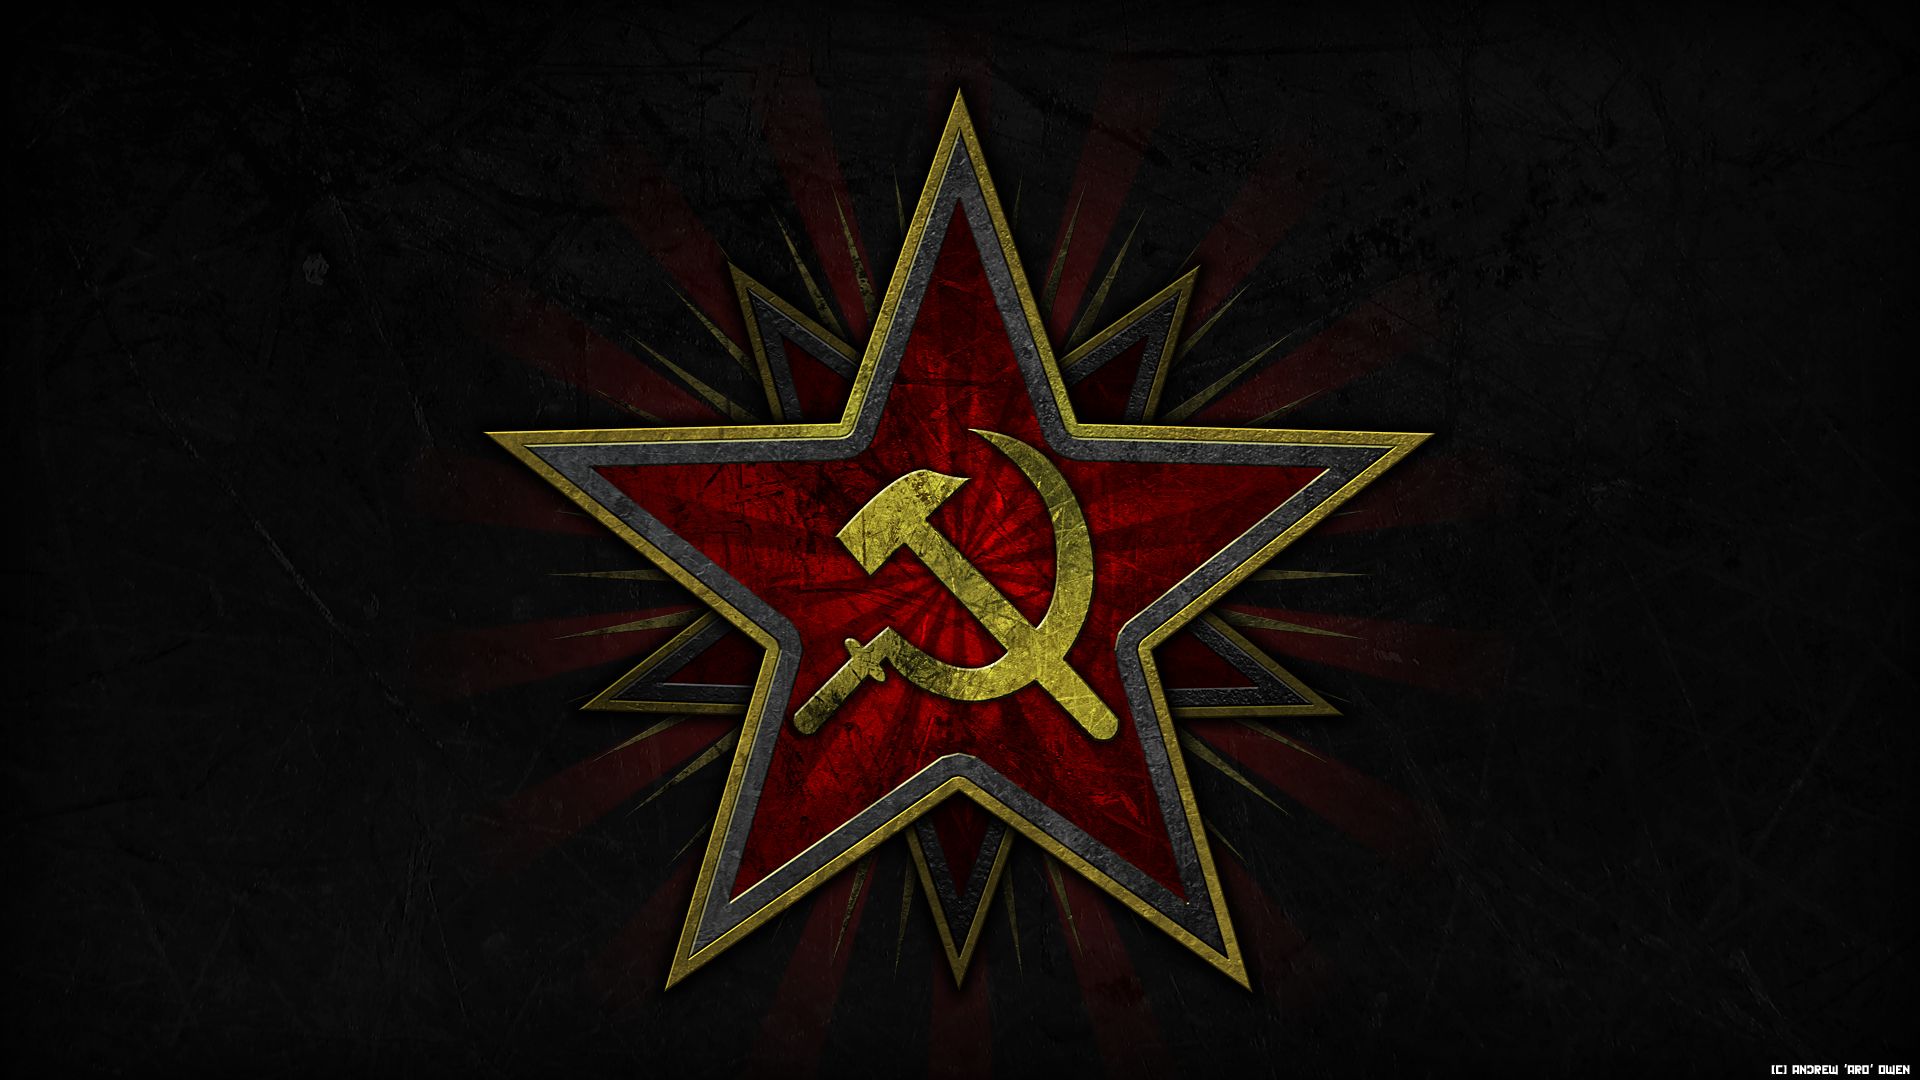 High Quality Hammer and sickle Blank Meme Template